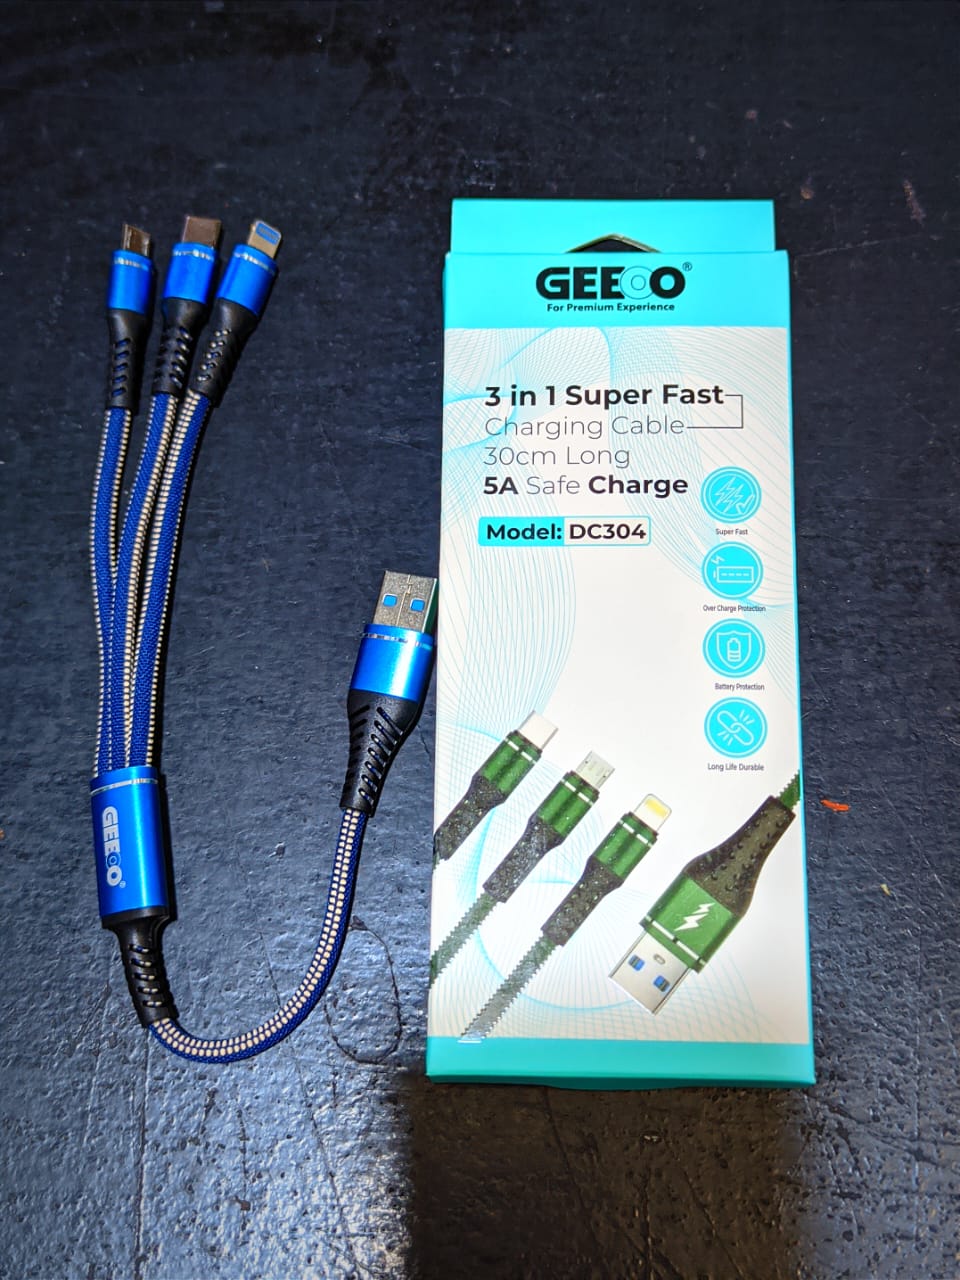 GEEOO Model 304 3 In 1 Super Fast Charging Cable 30CM Long 5A Safe Charge DataCable